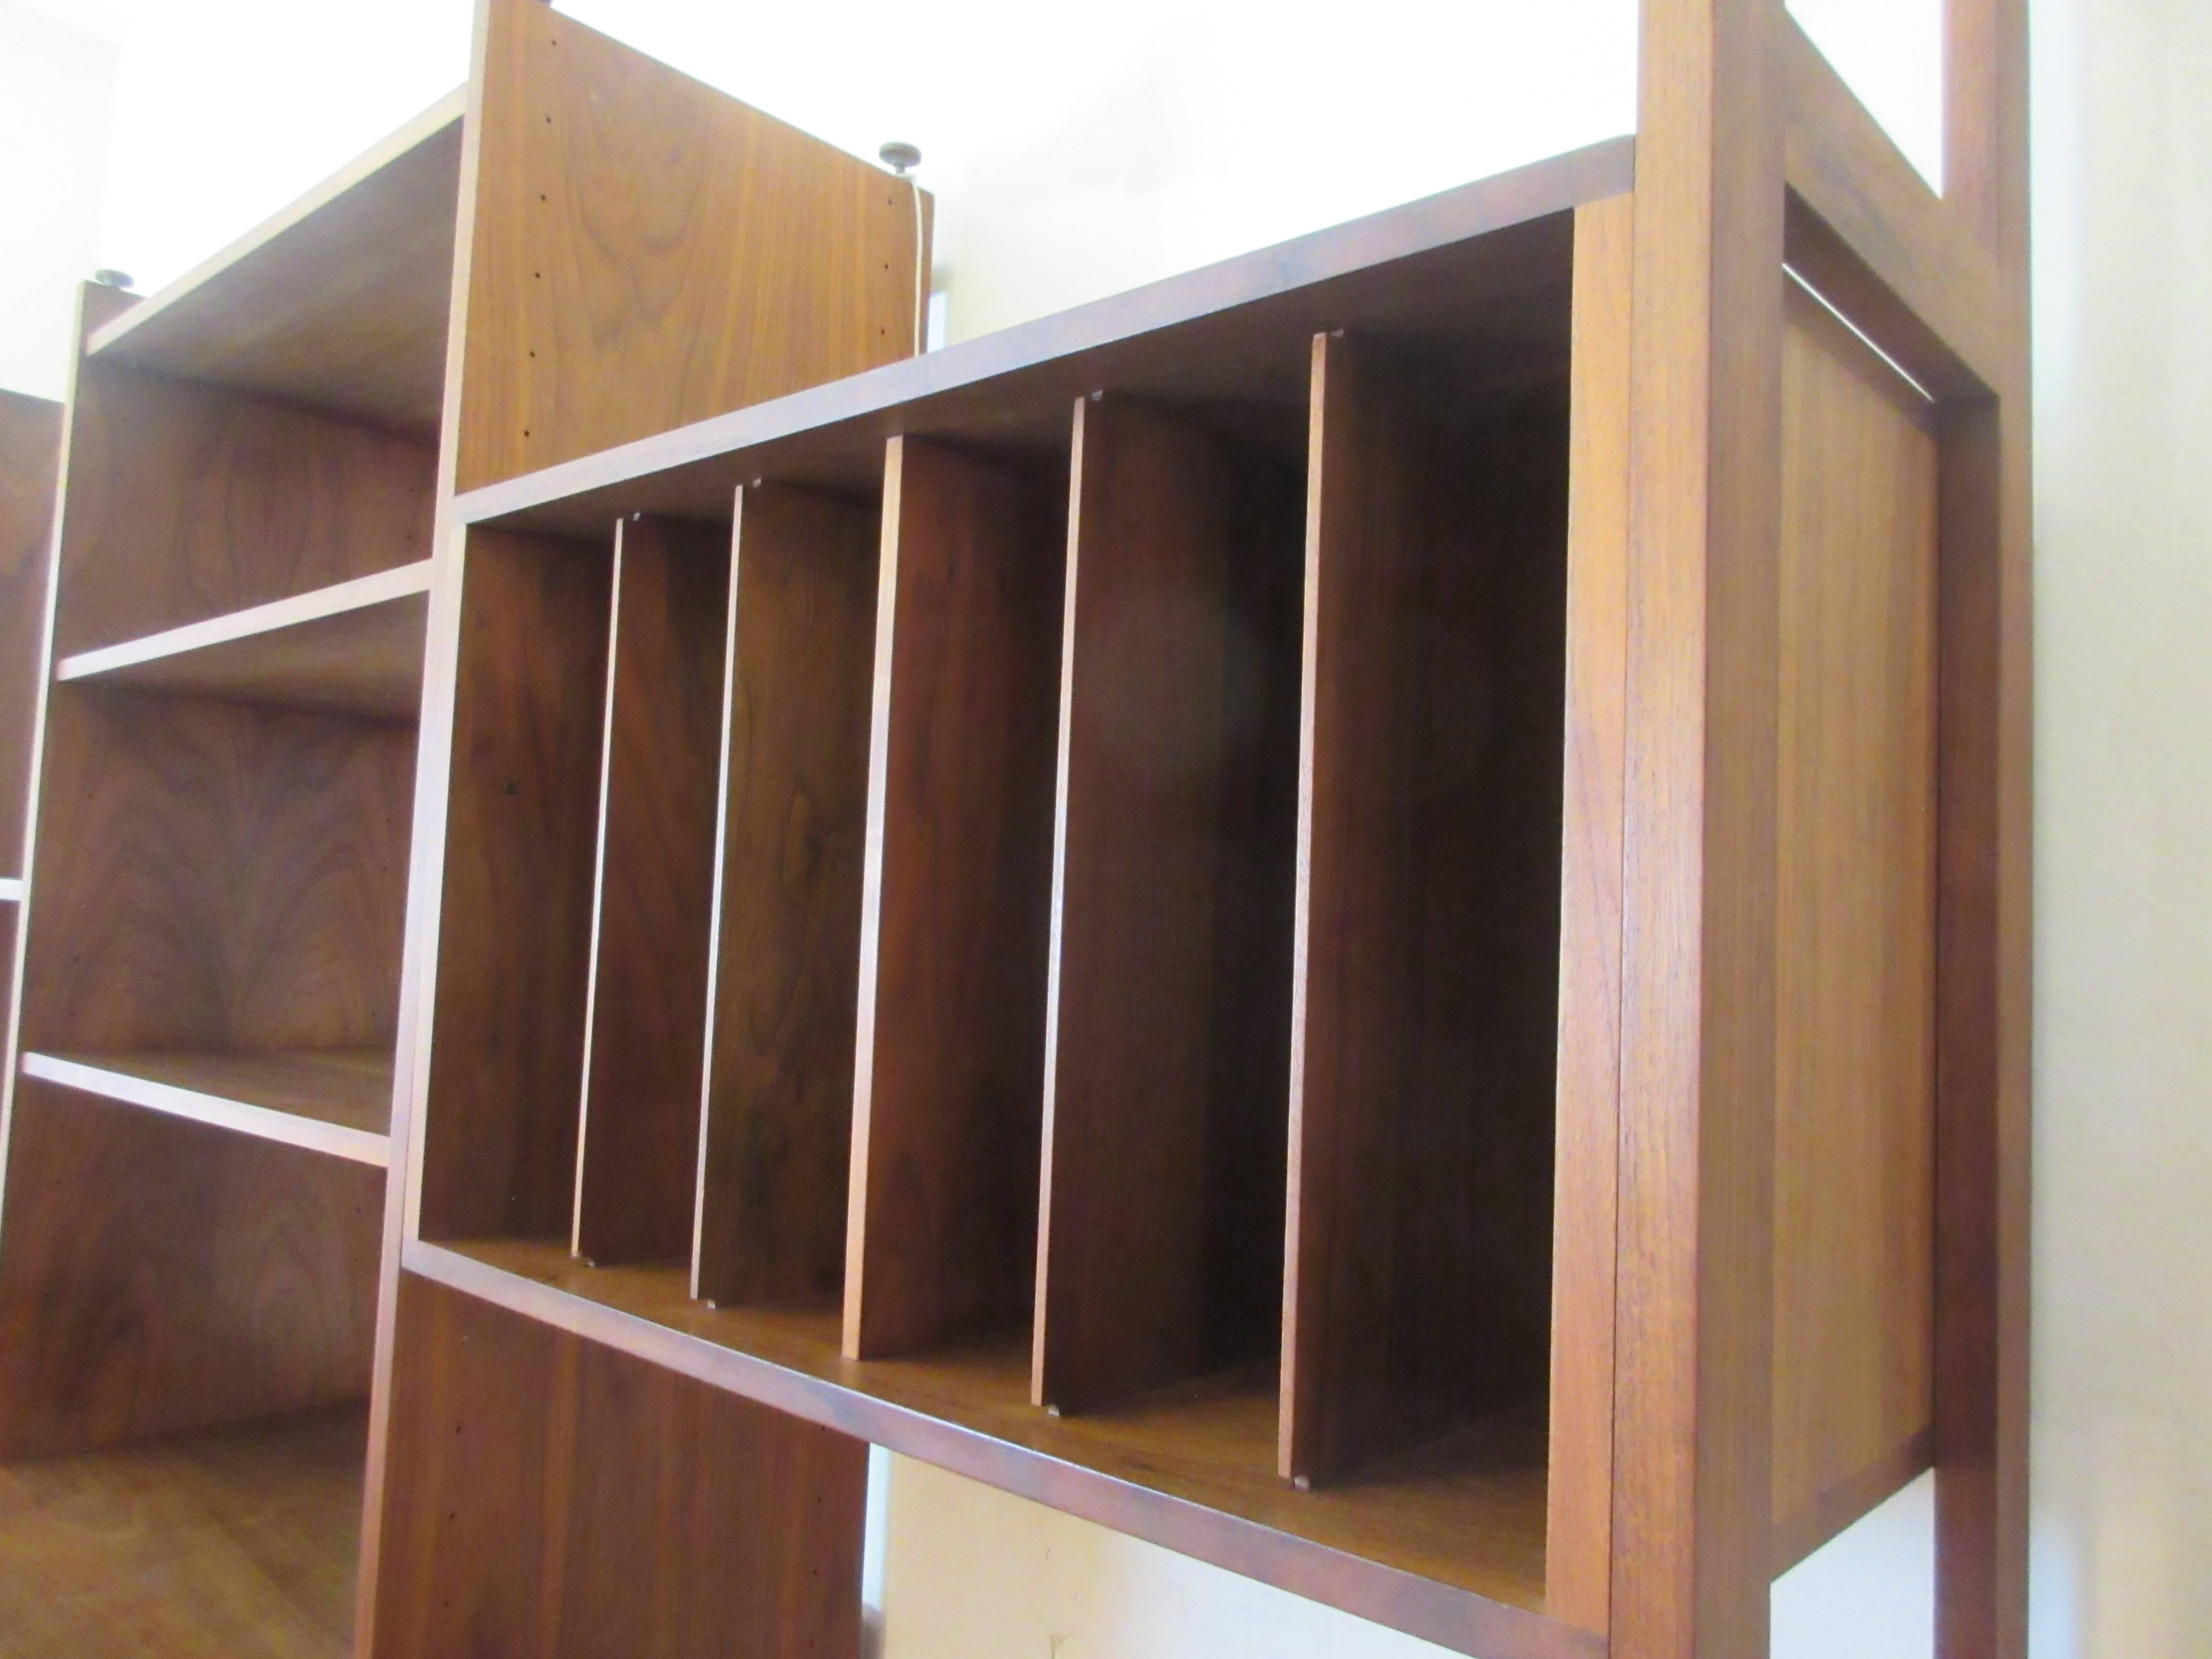 Mid-20th Century Hardwood House Wall or Room-Divider Shelving System